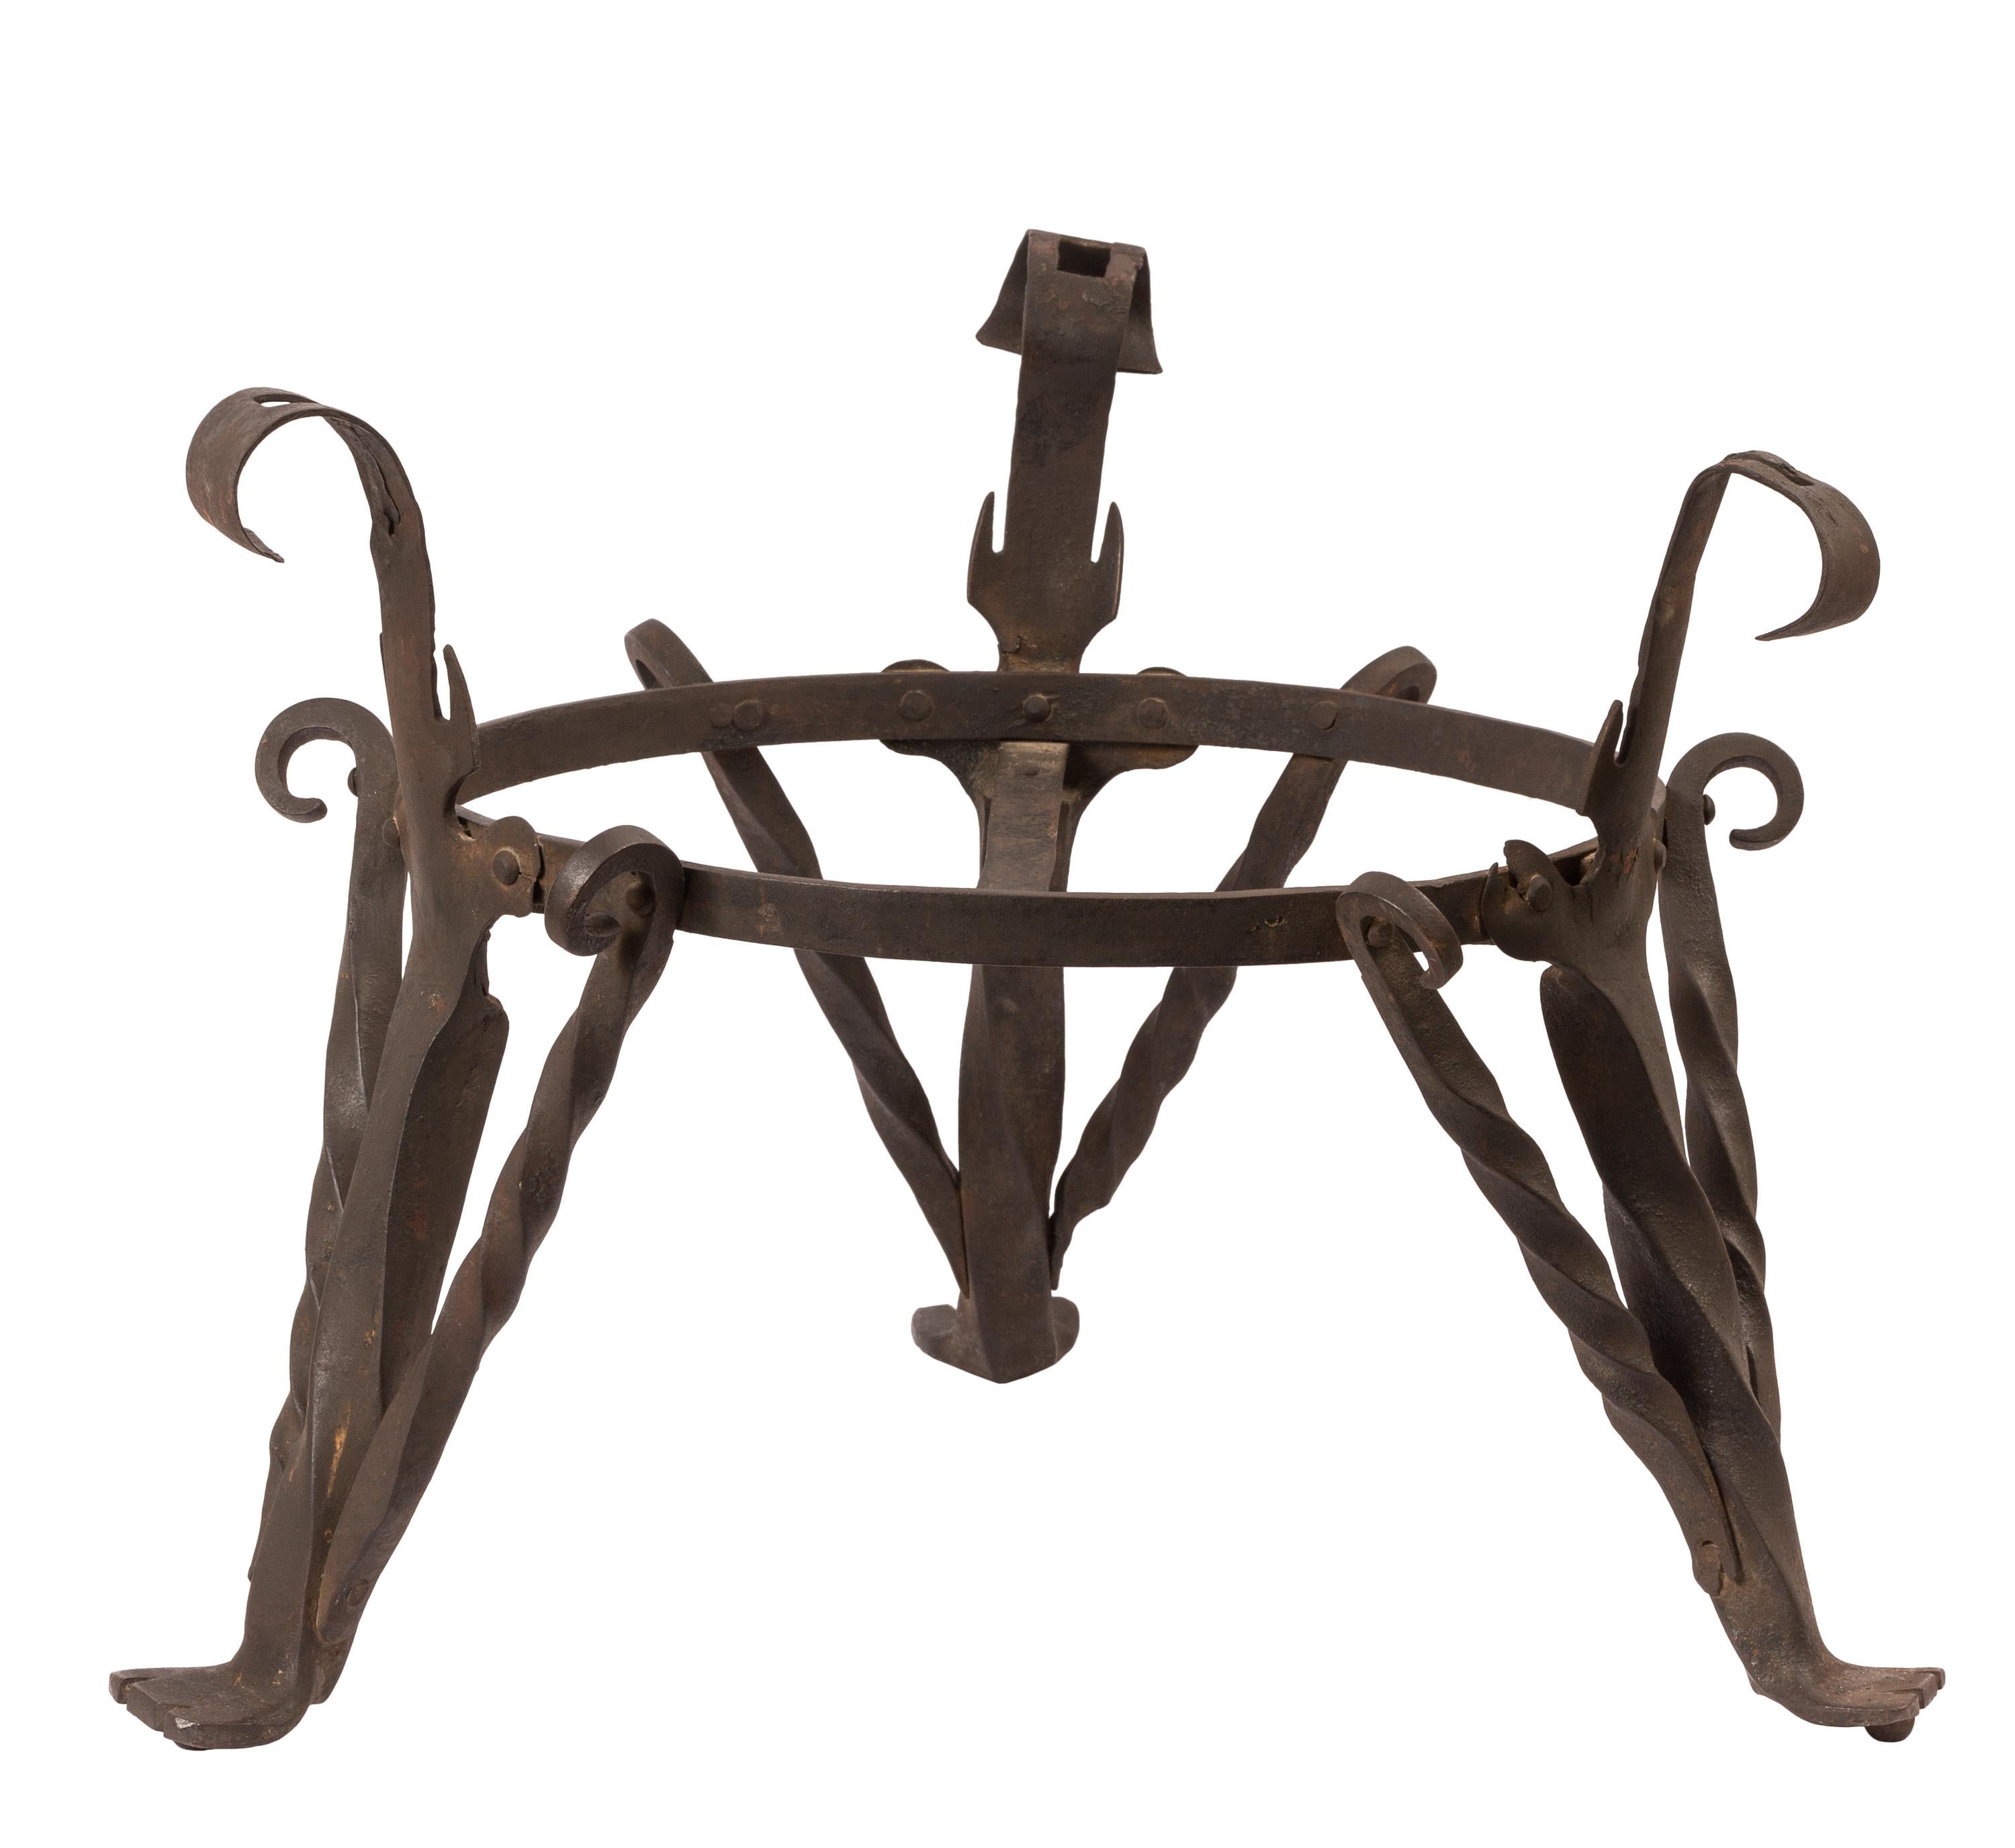 Rustic Large 19th Century Copper Cauldron / Planter on Wrought Iron Tripod Stand For Sale